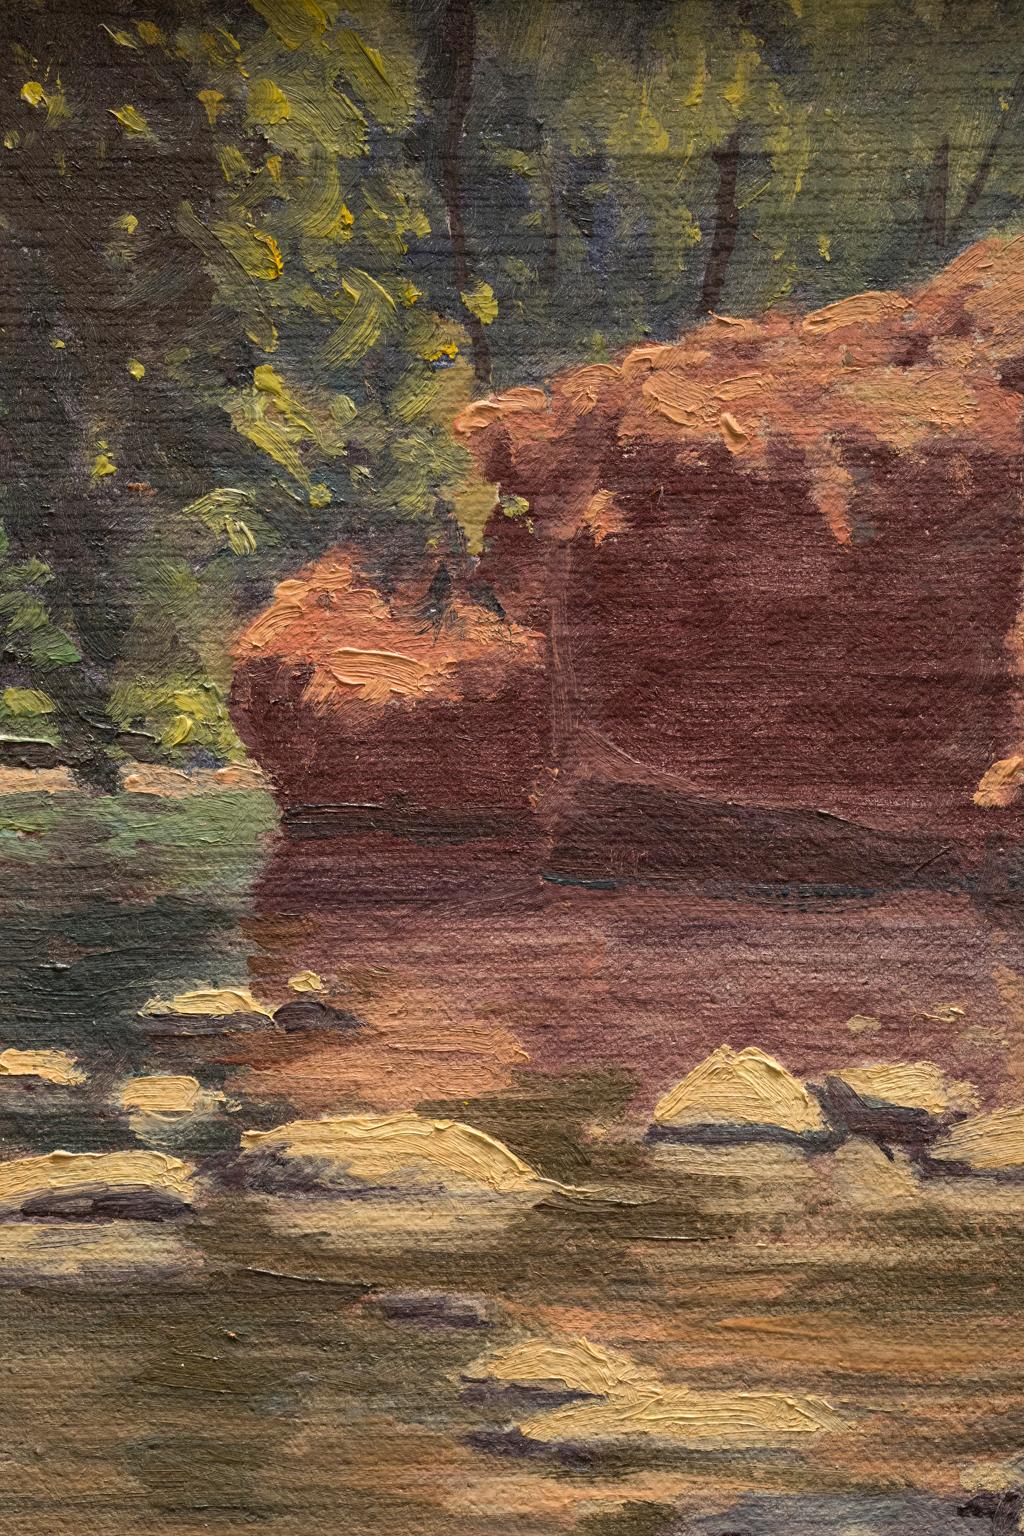 This landscape painting by Don Miles is titled 